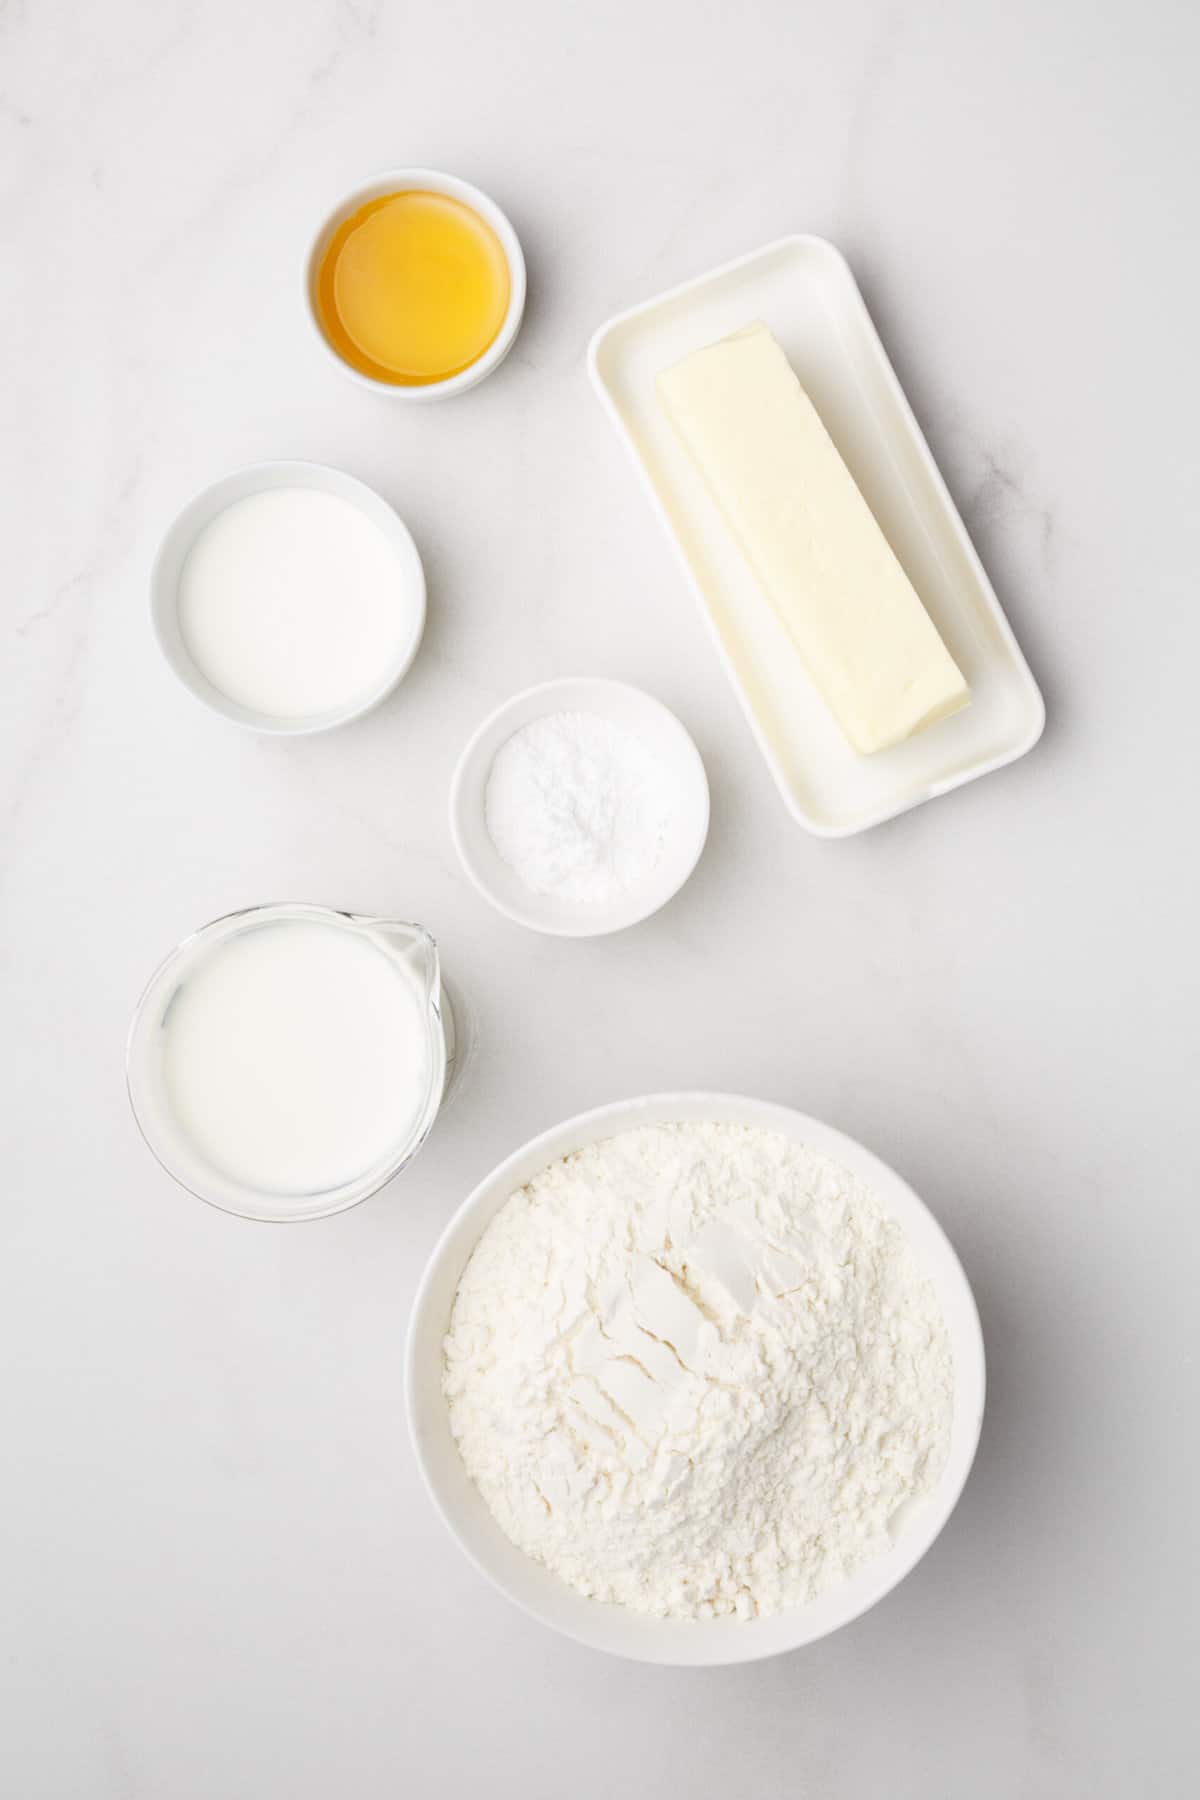 The ingredients to make buttermilk biscuits are shown portioned out on a white background.